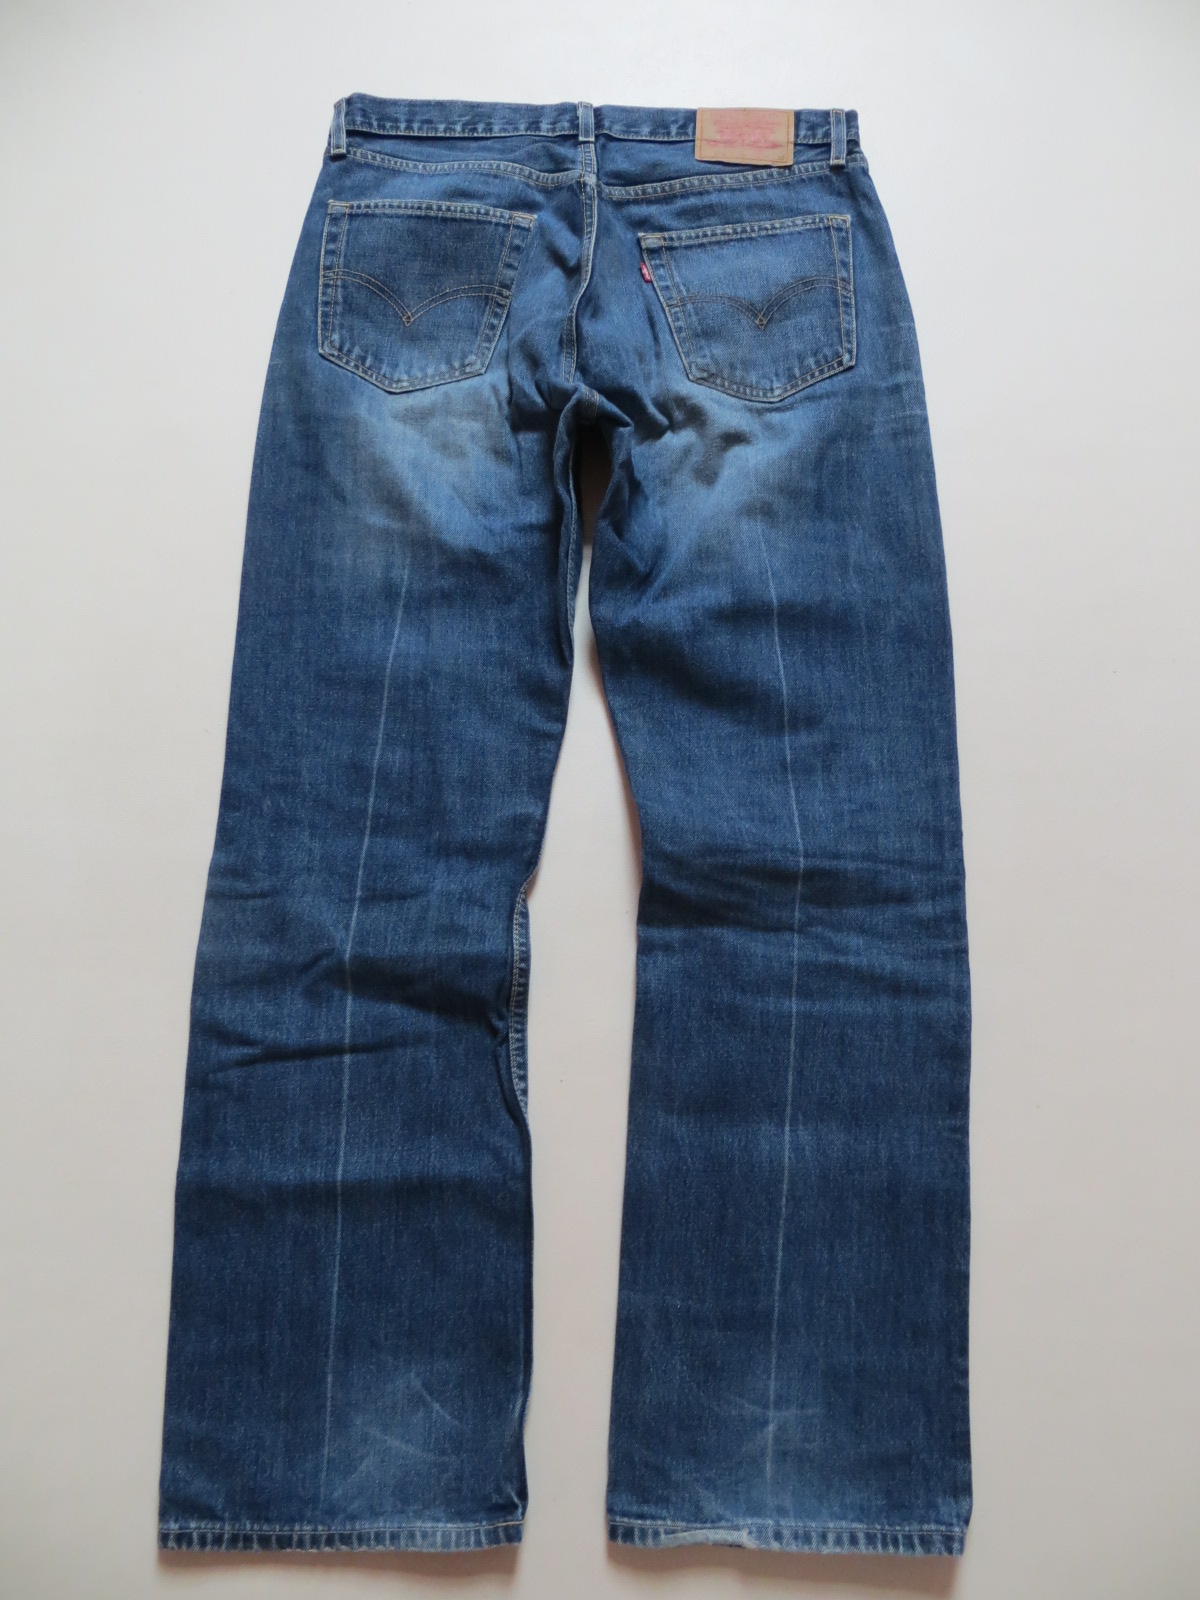 Levi's 508 Loose Jeans Trousers W 32/L 32, Denim with Cult Wash, Wide ...